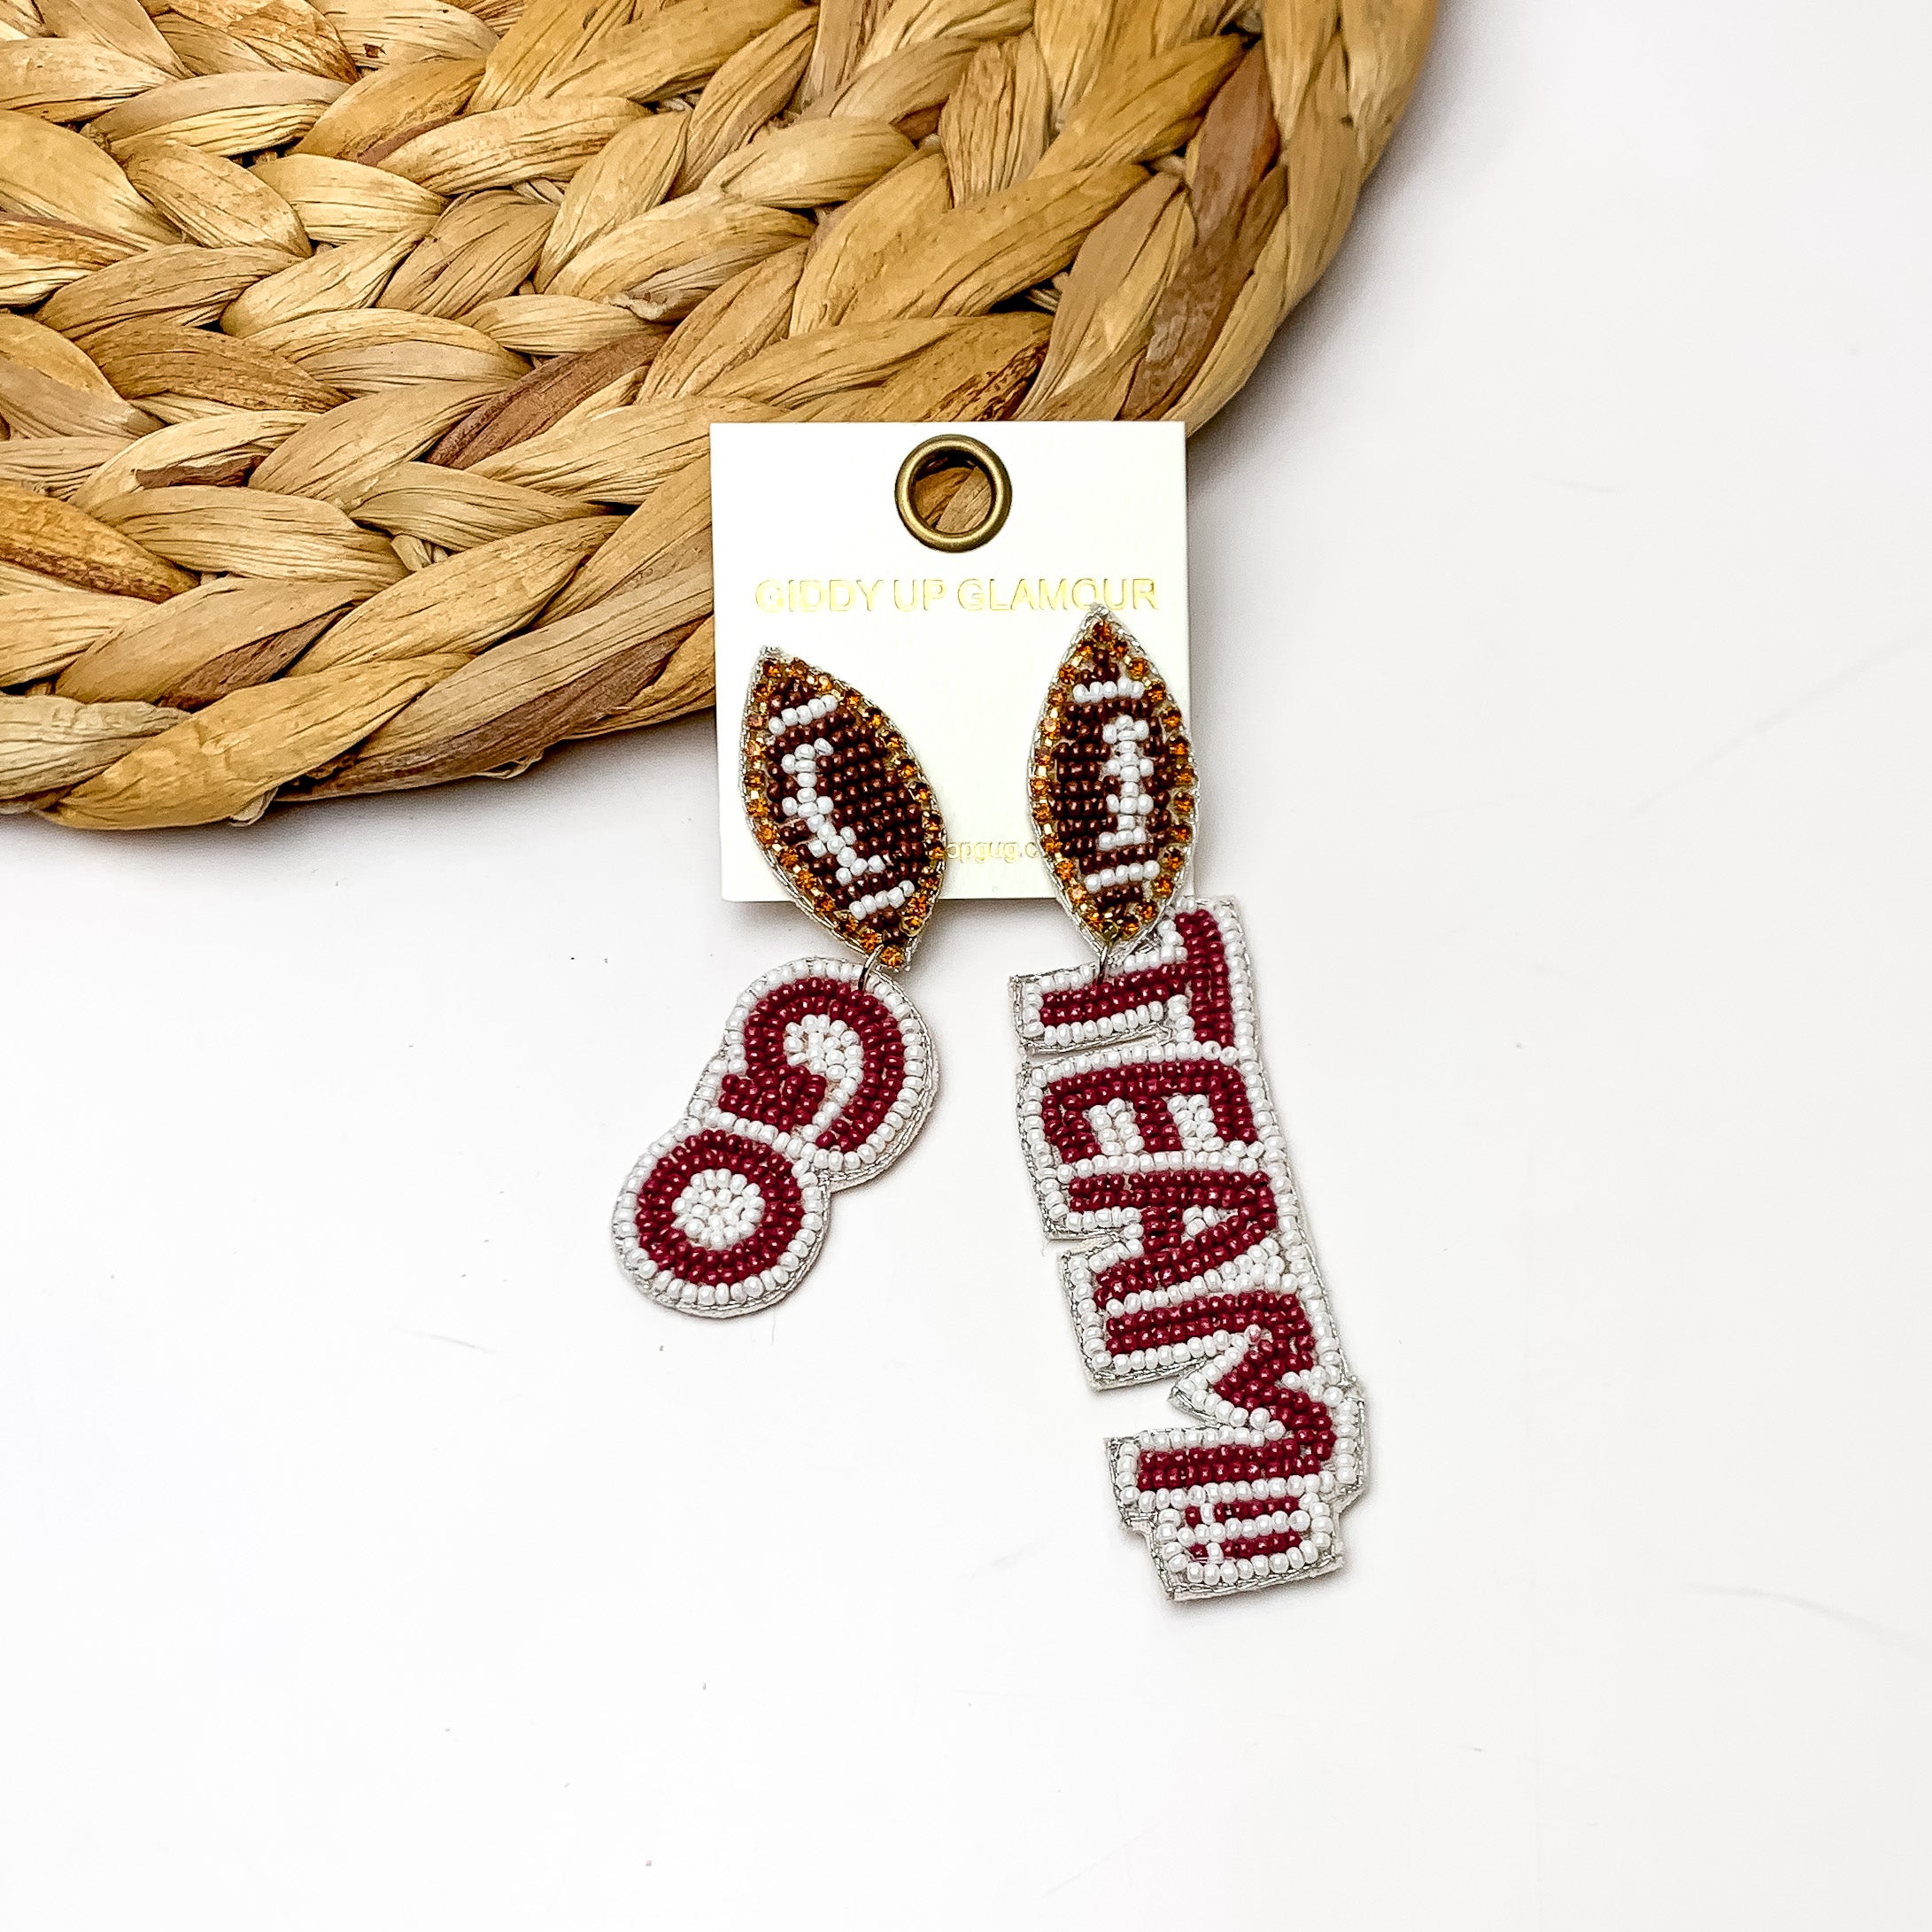 " Go Team!!" Beaded Earrings With Football Posts in Maroon and White. These earrings are laying against a woven piece with a white background behind it.